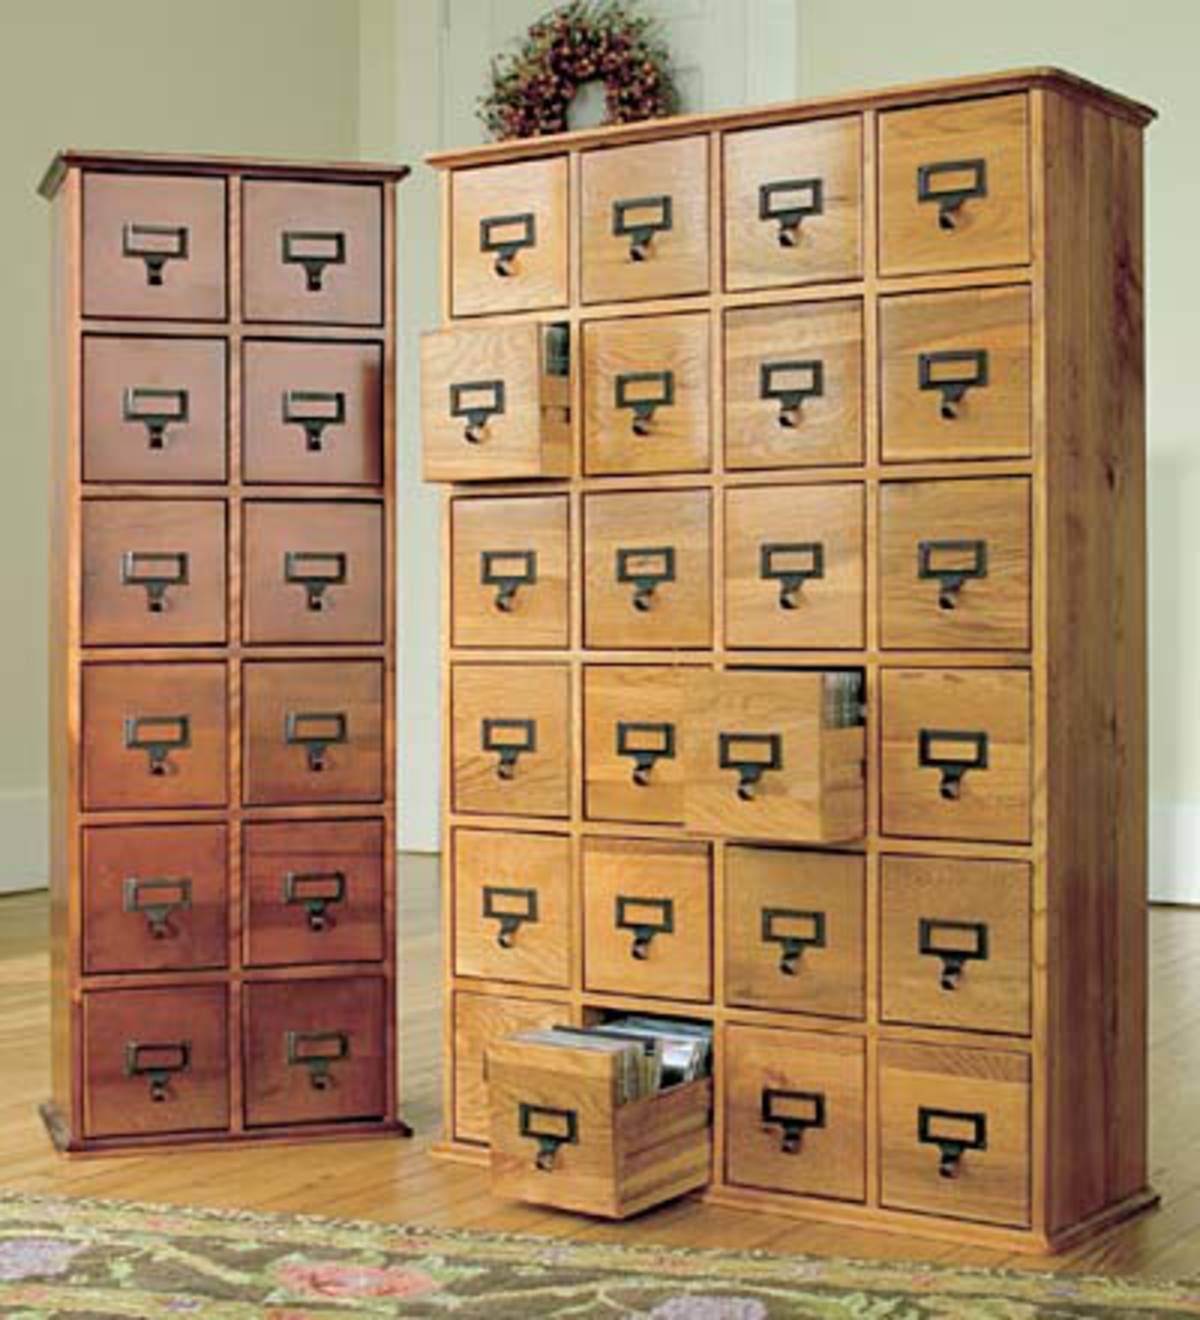 Home retro style wooden multimedia library file cabinets